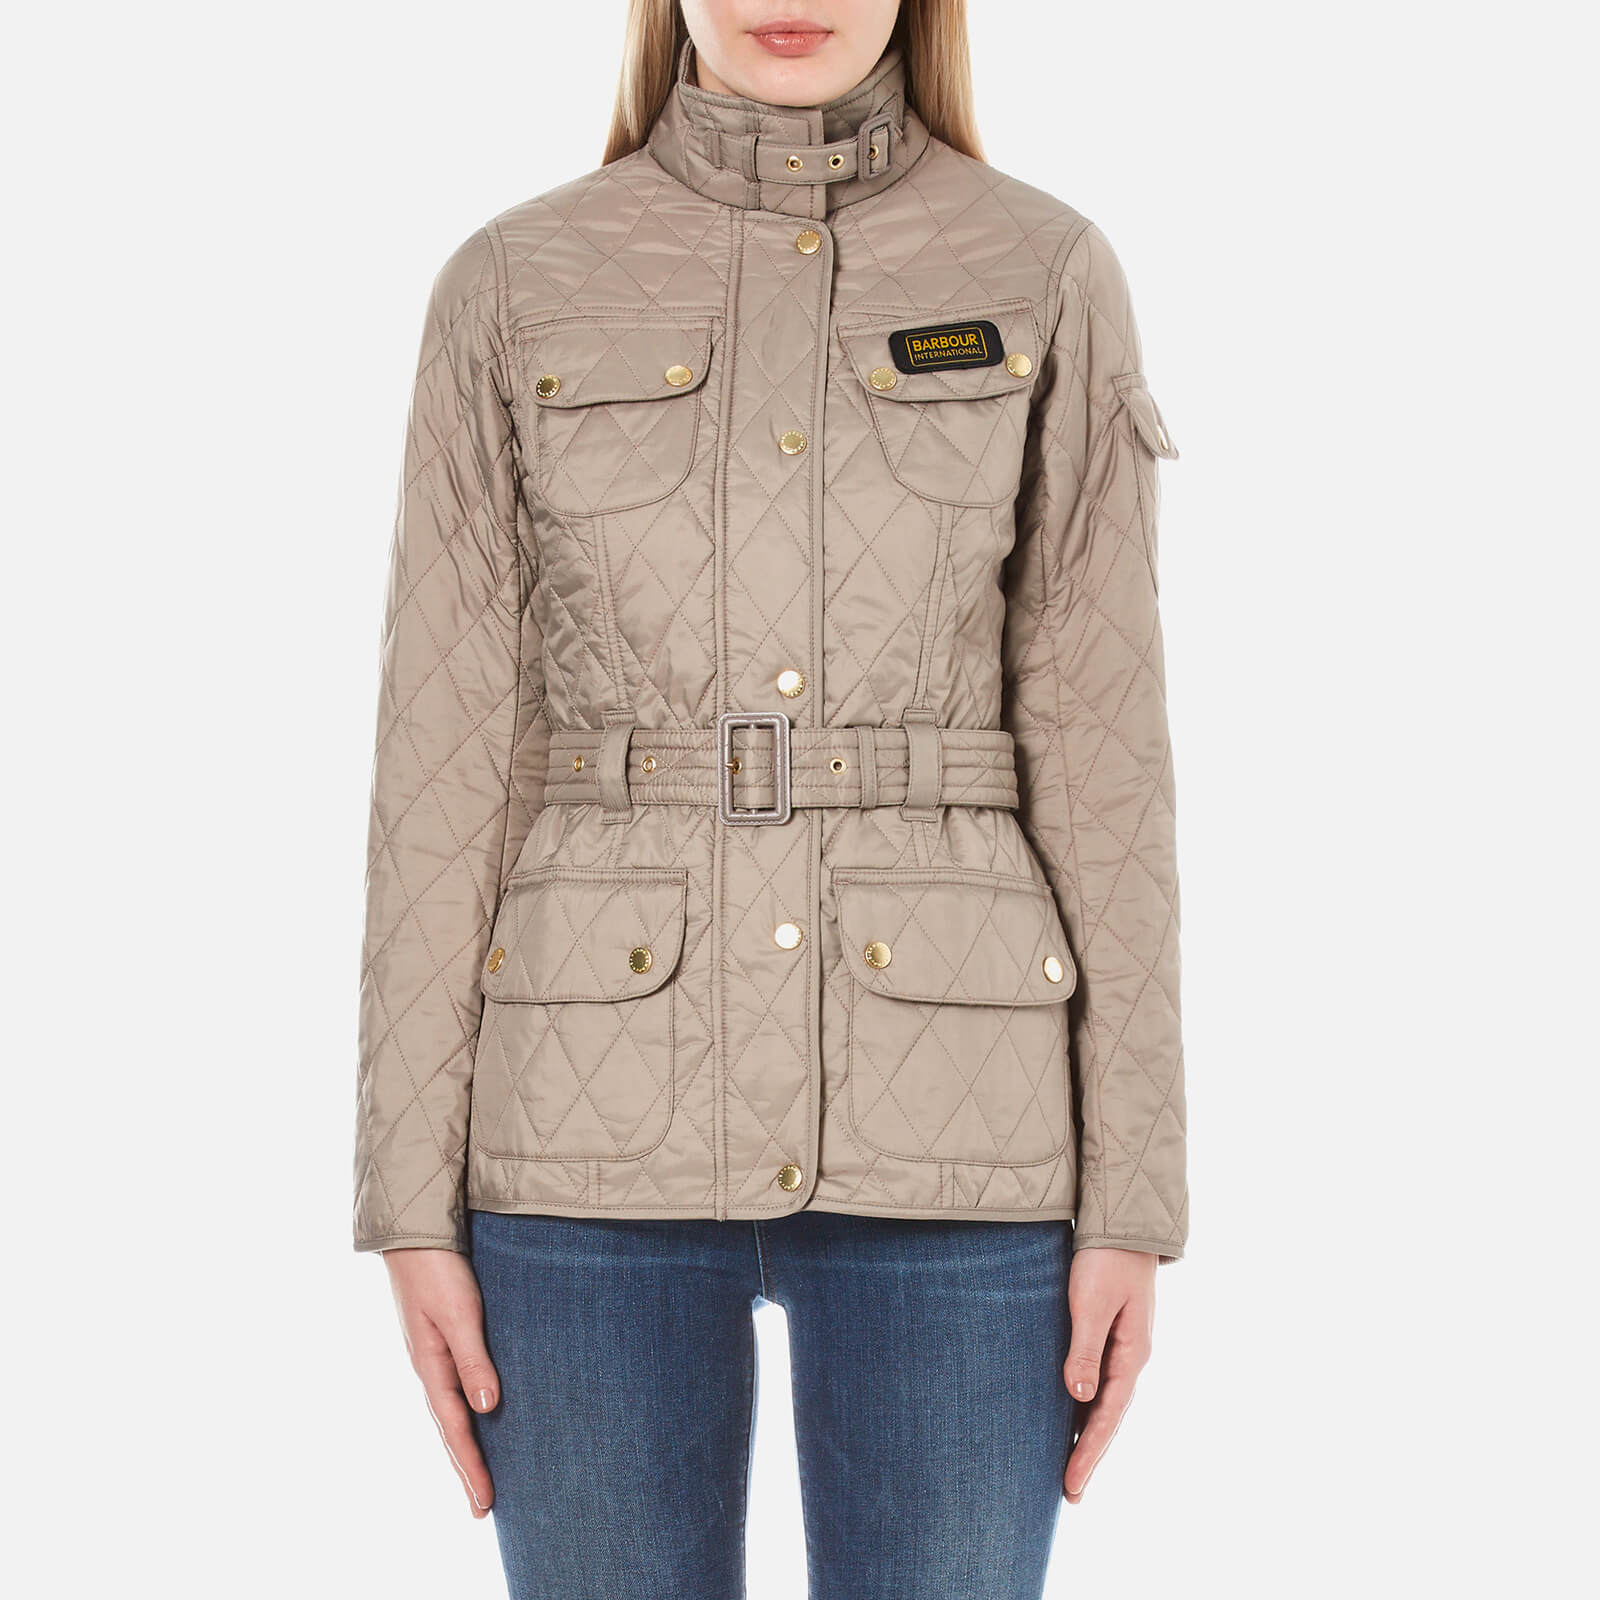 Barbour International Women's Quilt Jacket - Taupe Pearl - UK 12 - Cream